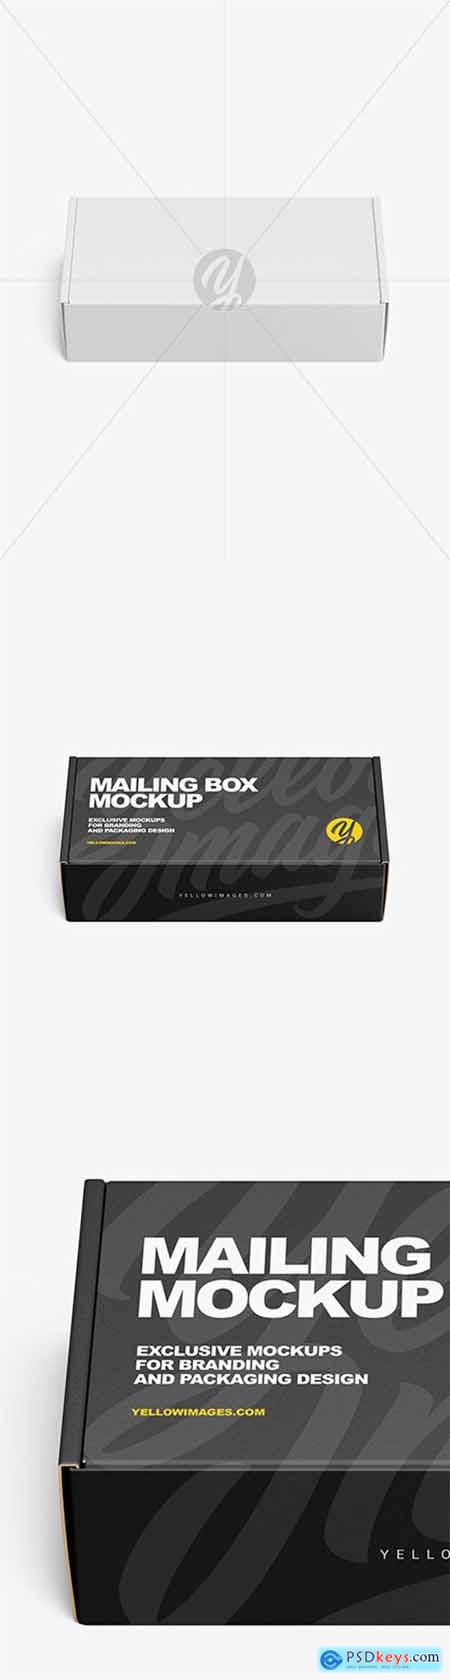 Download Paper Box Mockup 47925 Free Download Photoshop Vector Stock Image Via Torrent Zippyshare From Psdkeys Com Yellowimages Mockups